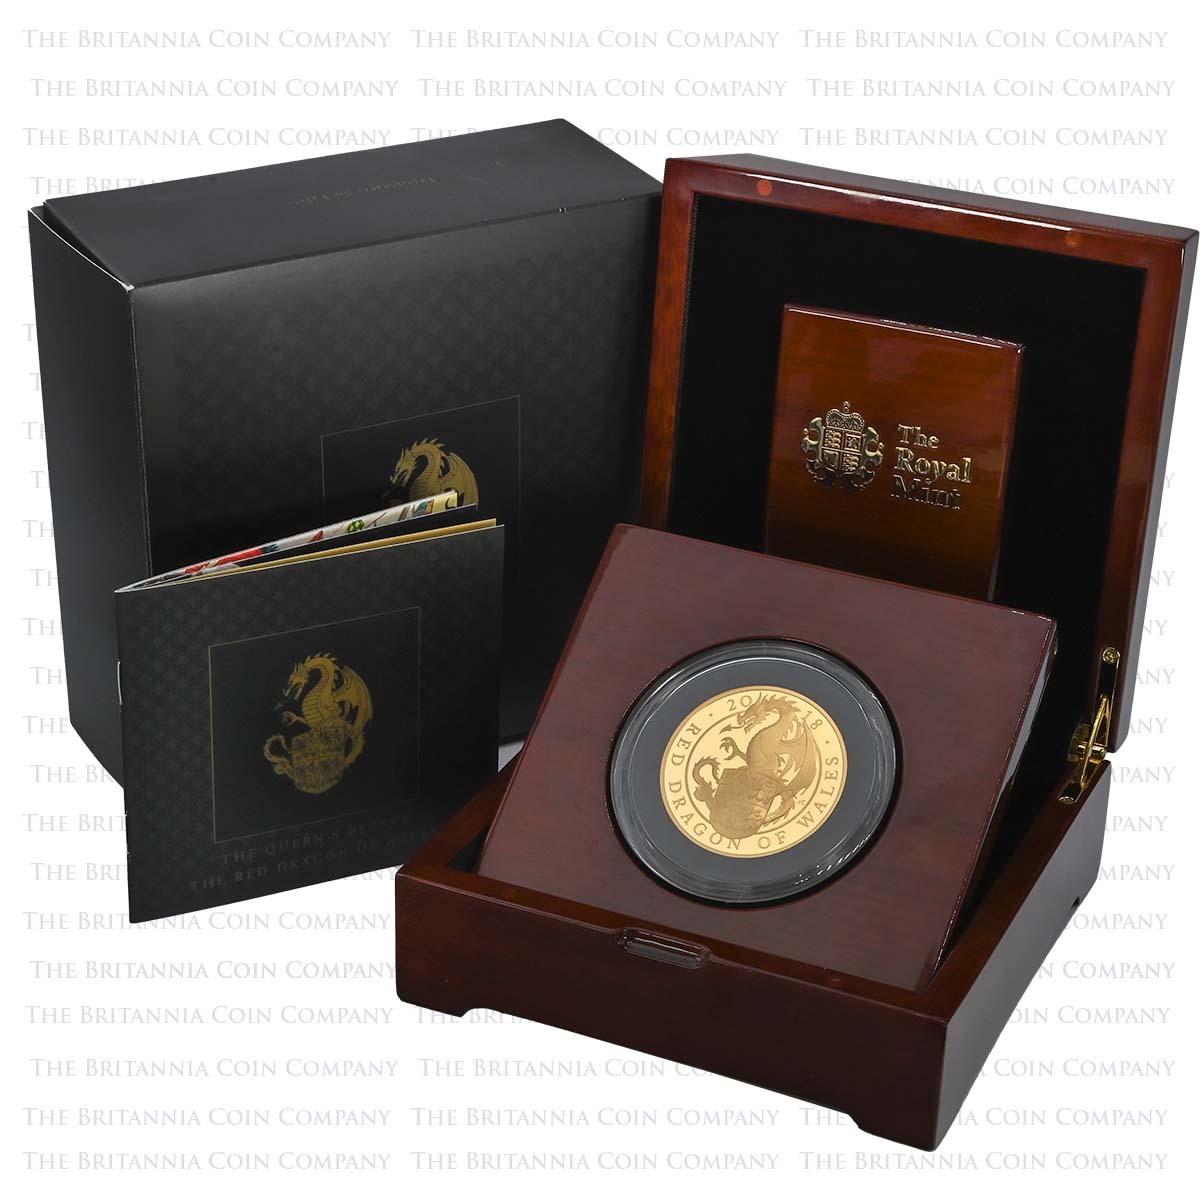 UK18QDG5 2018 Queen's Beasts Red Dragon Of Wales 5oz Gold Proof Coin Packaging